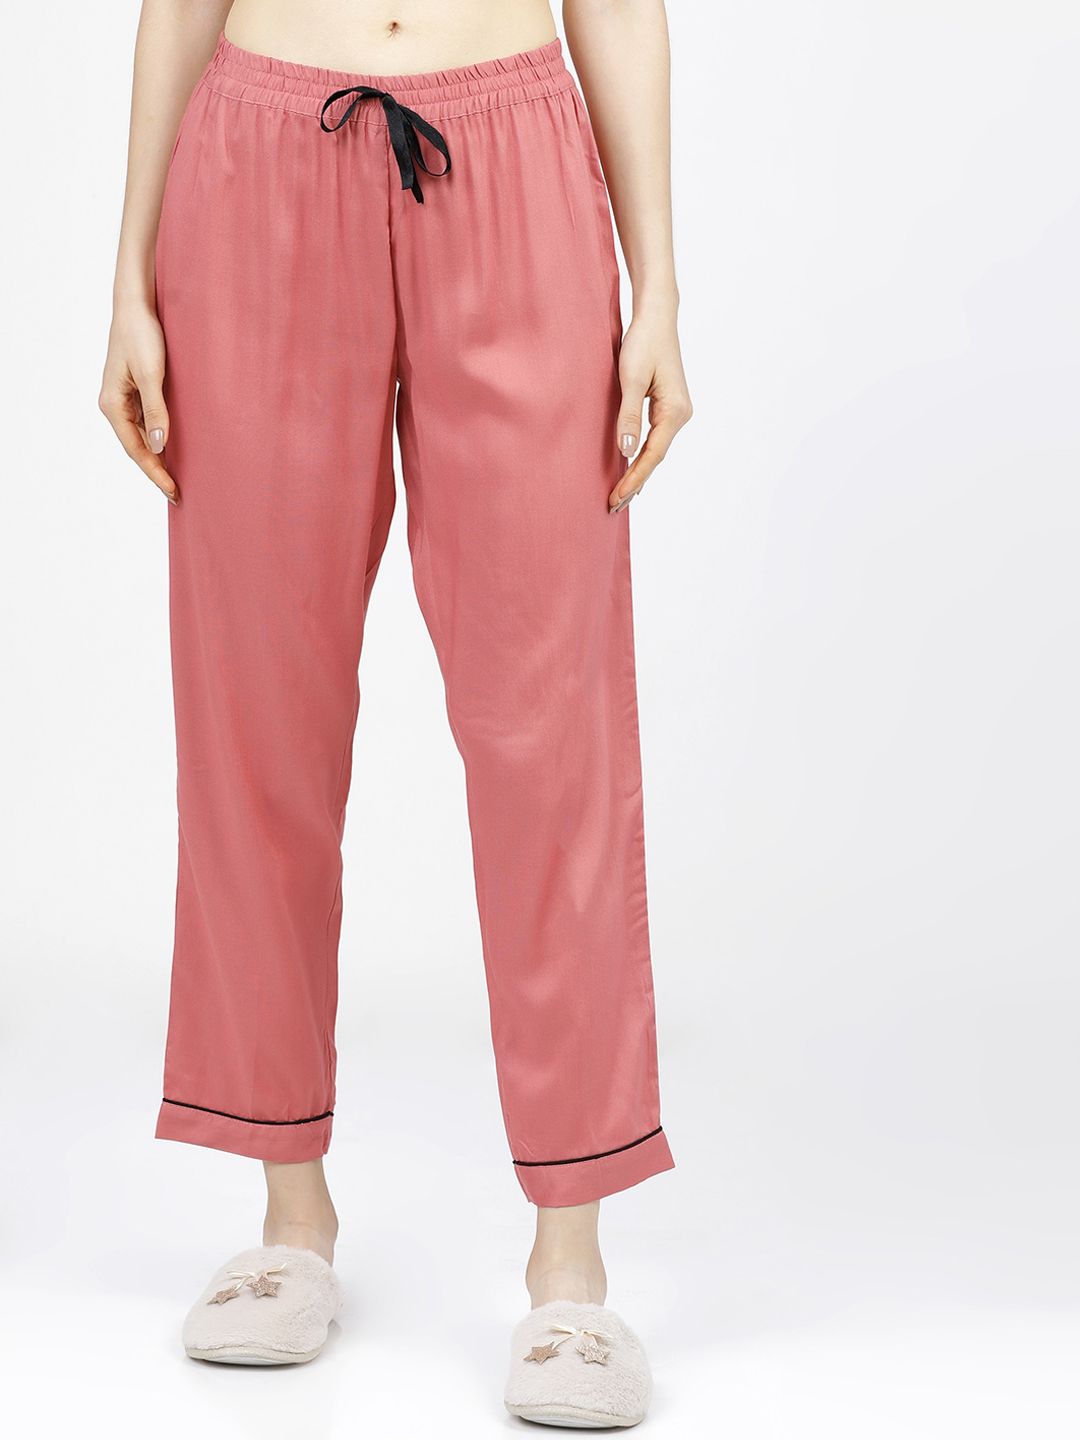 Tokyo Talkies Women Rose Coloured Solid Lounge Pants Price in India